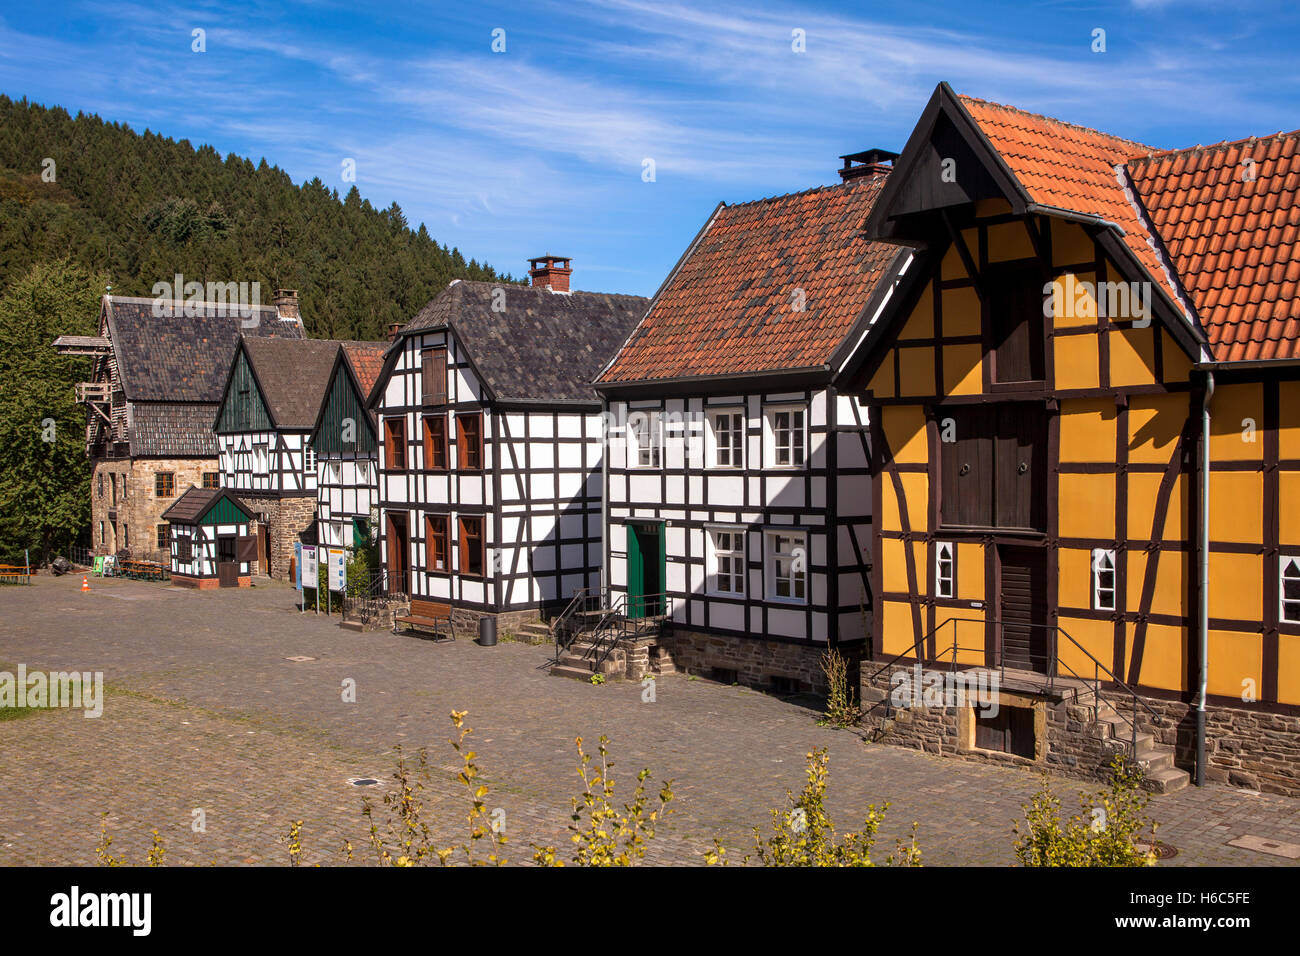 Germany, Hagen, Hagen Open-air Museum, half-timbered houses on the village square. Stock Photo